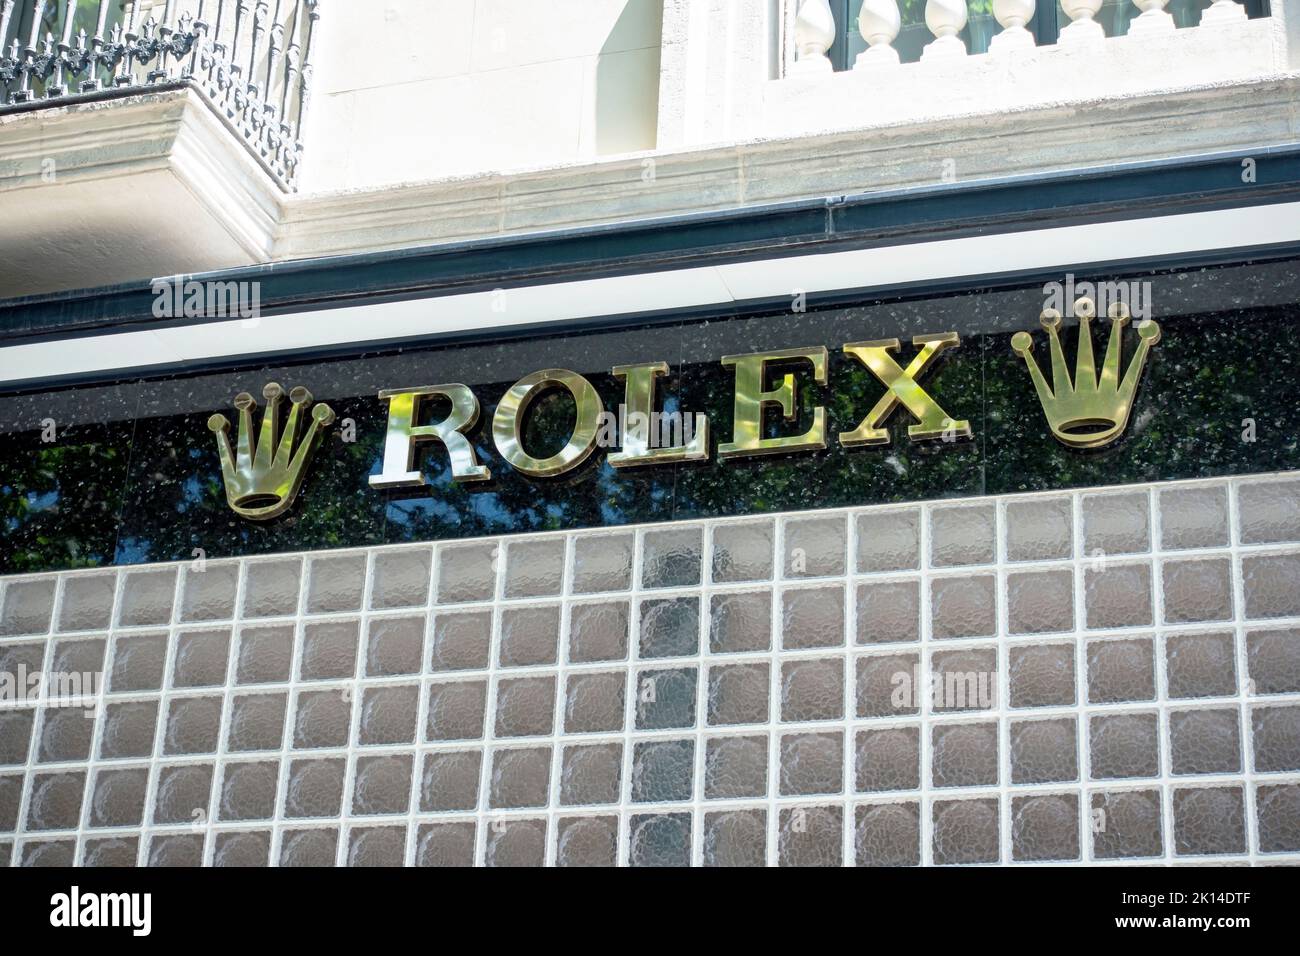 Barcelona, Spain - May 9, 2022: Rolex store sign. Rolex is a British-founded Swiss watch designer and manufacturer based in Geneva, Switzerland. Stock Photo